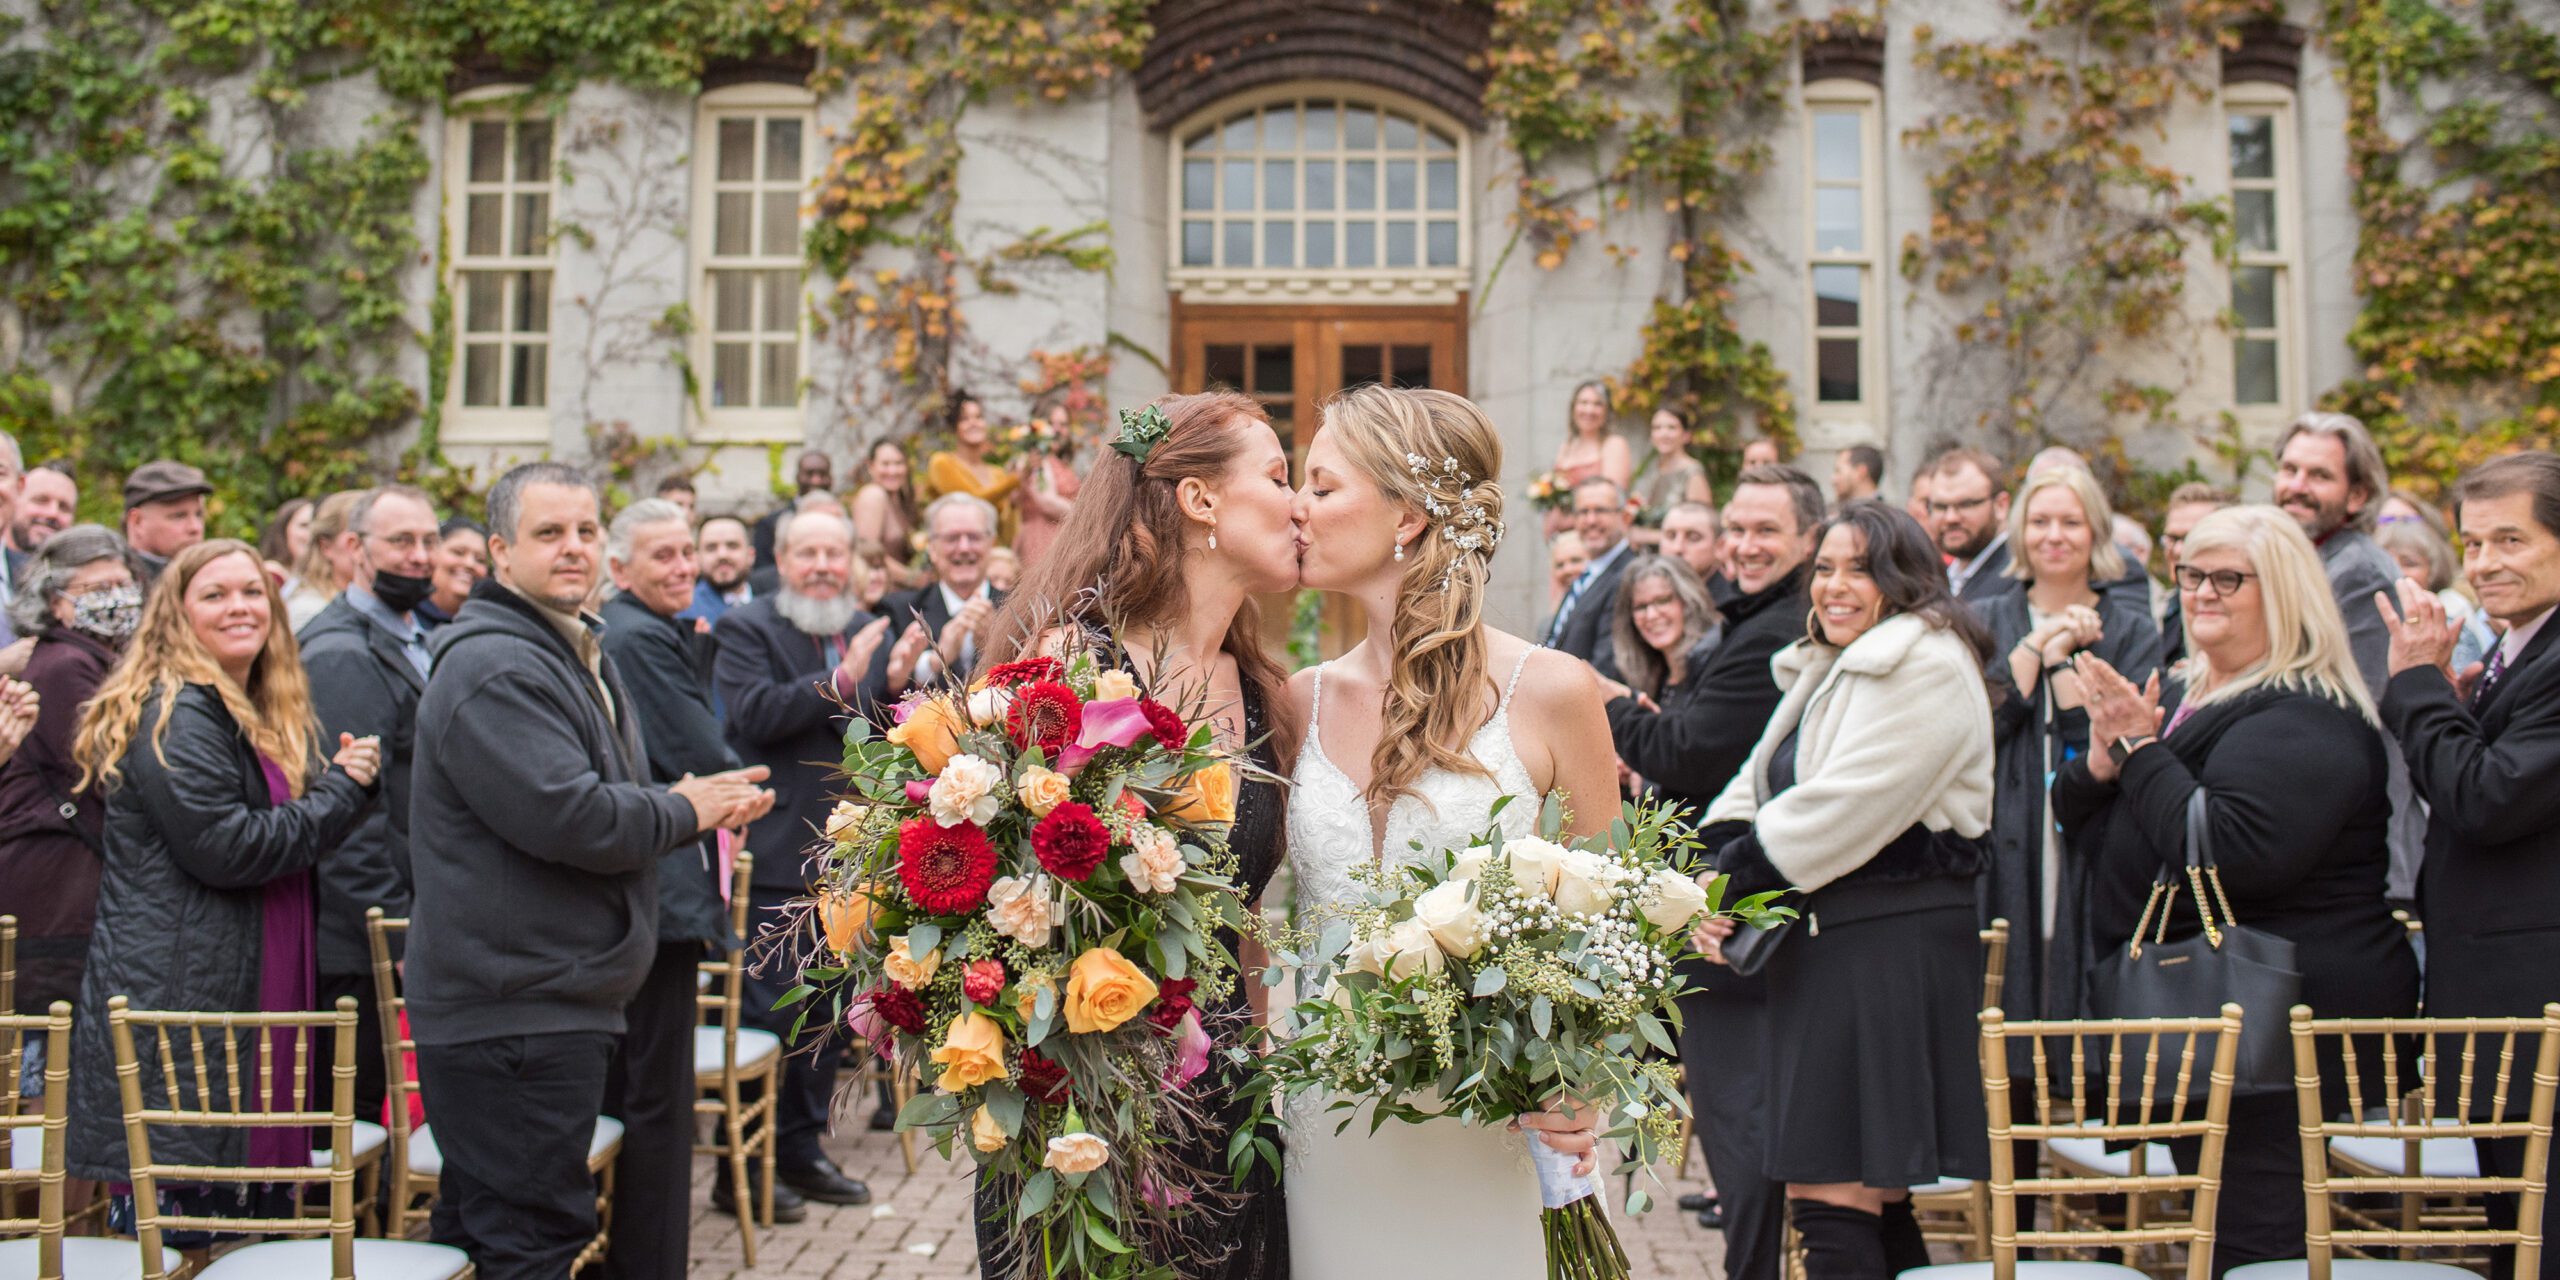 Brides kissing at the end of the ceremony aisle at The Old Court House.